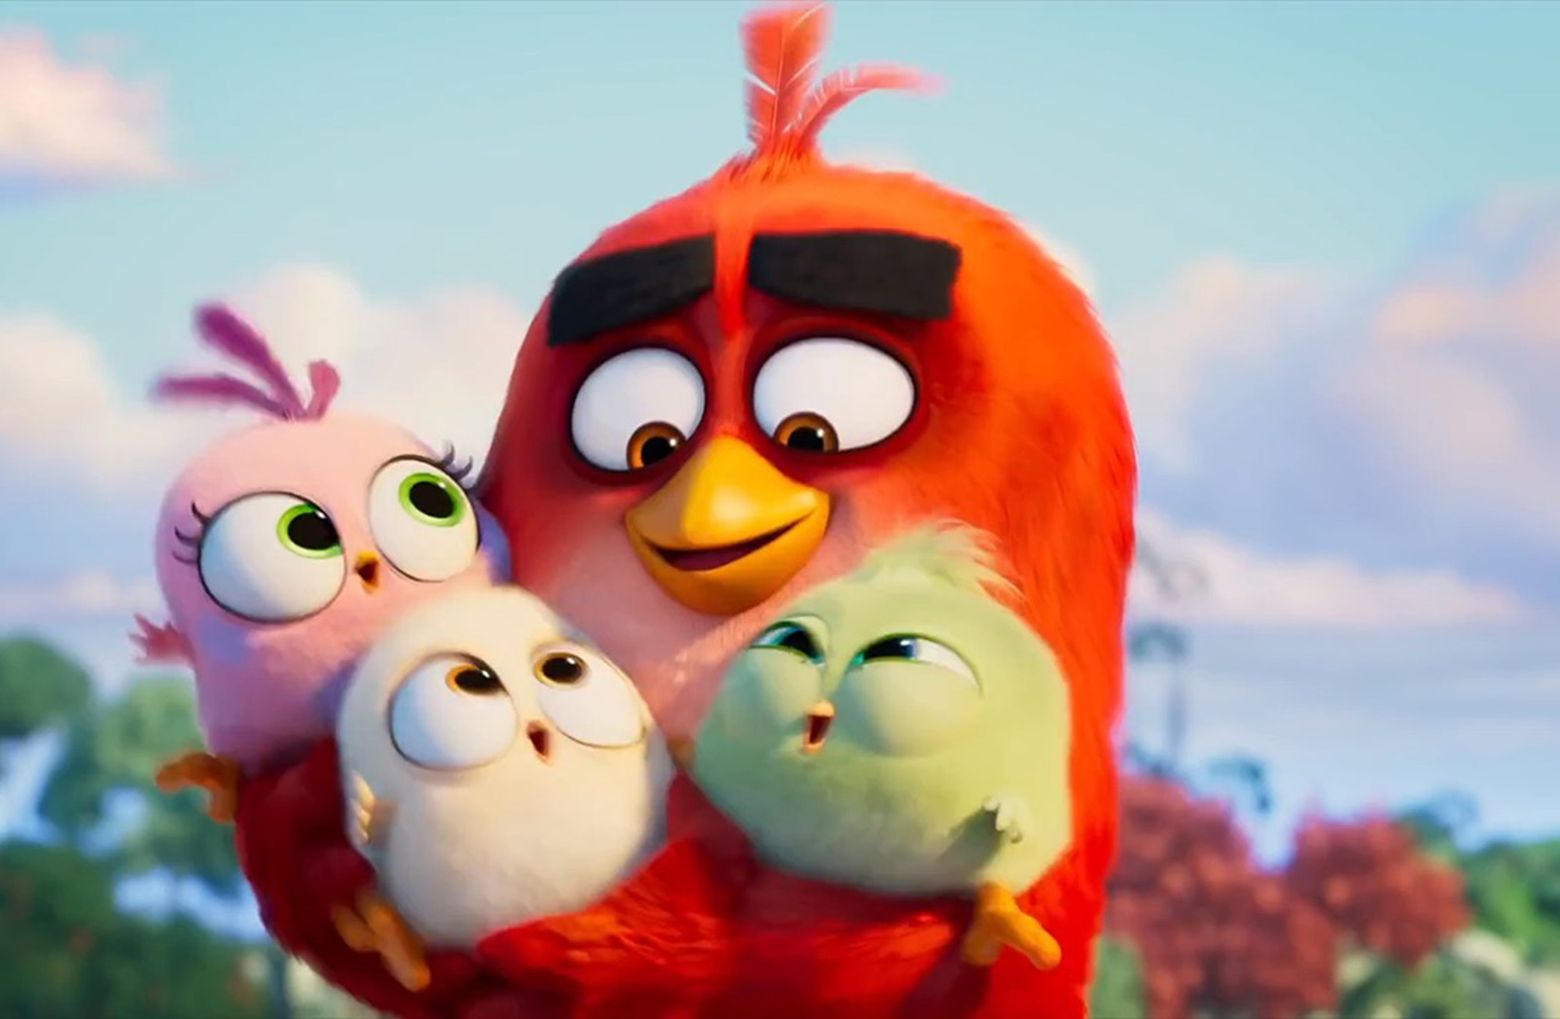 https://images.seattletimes.com/wp-content/uploads/2019/08/201908121014MCT_____PHOTO____ENTER-ANGRYBIRDS2-MOVIE-REVIEW-MCT.jpg?d=1560x1019